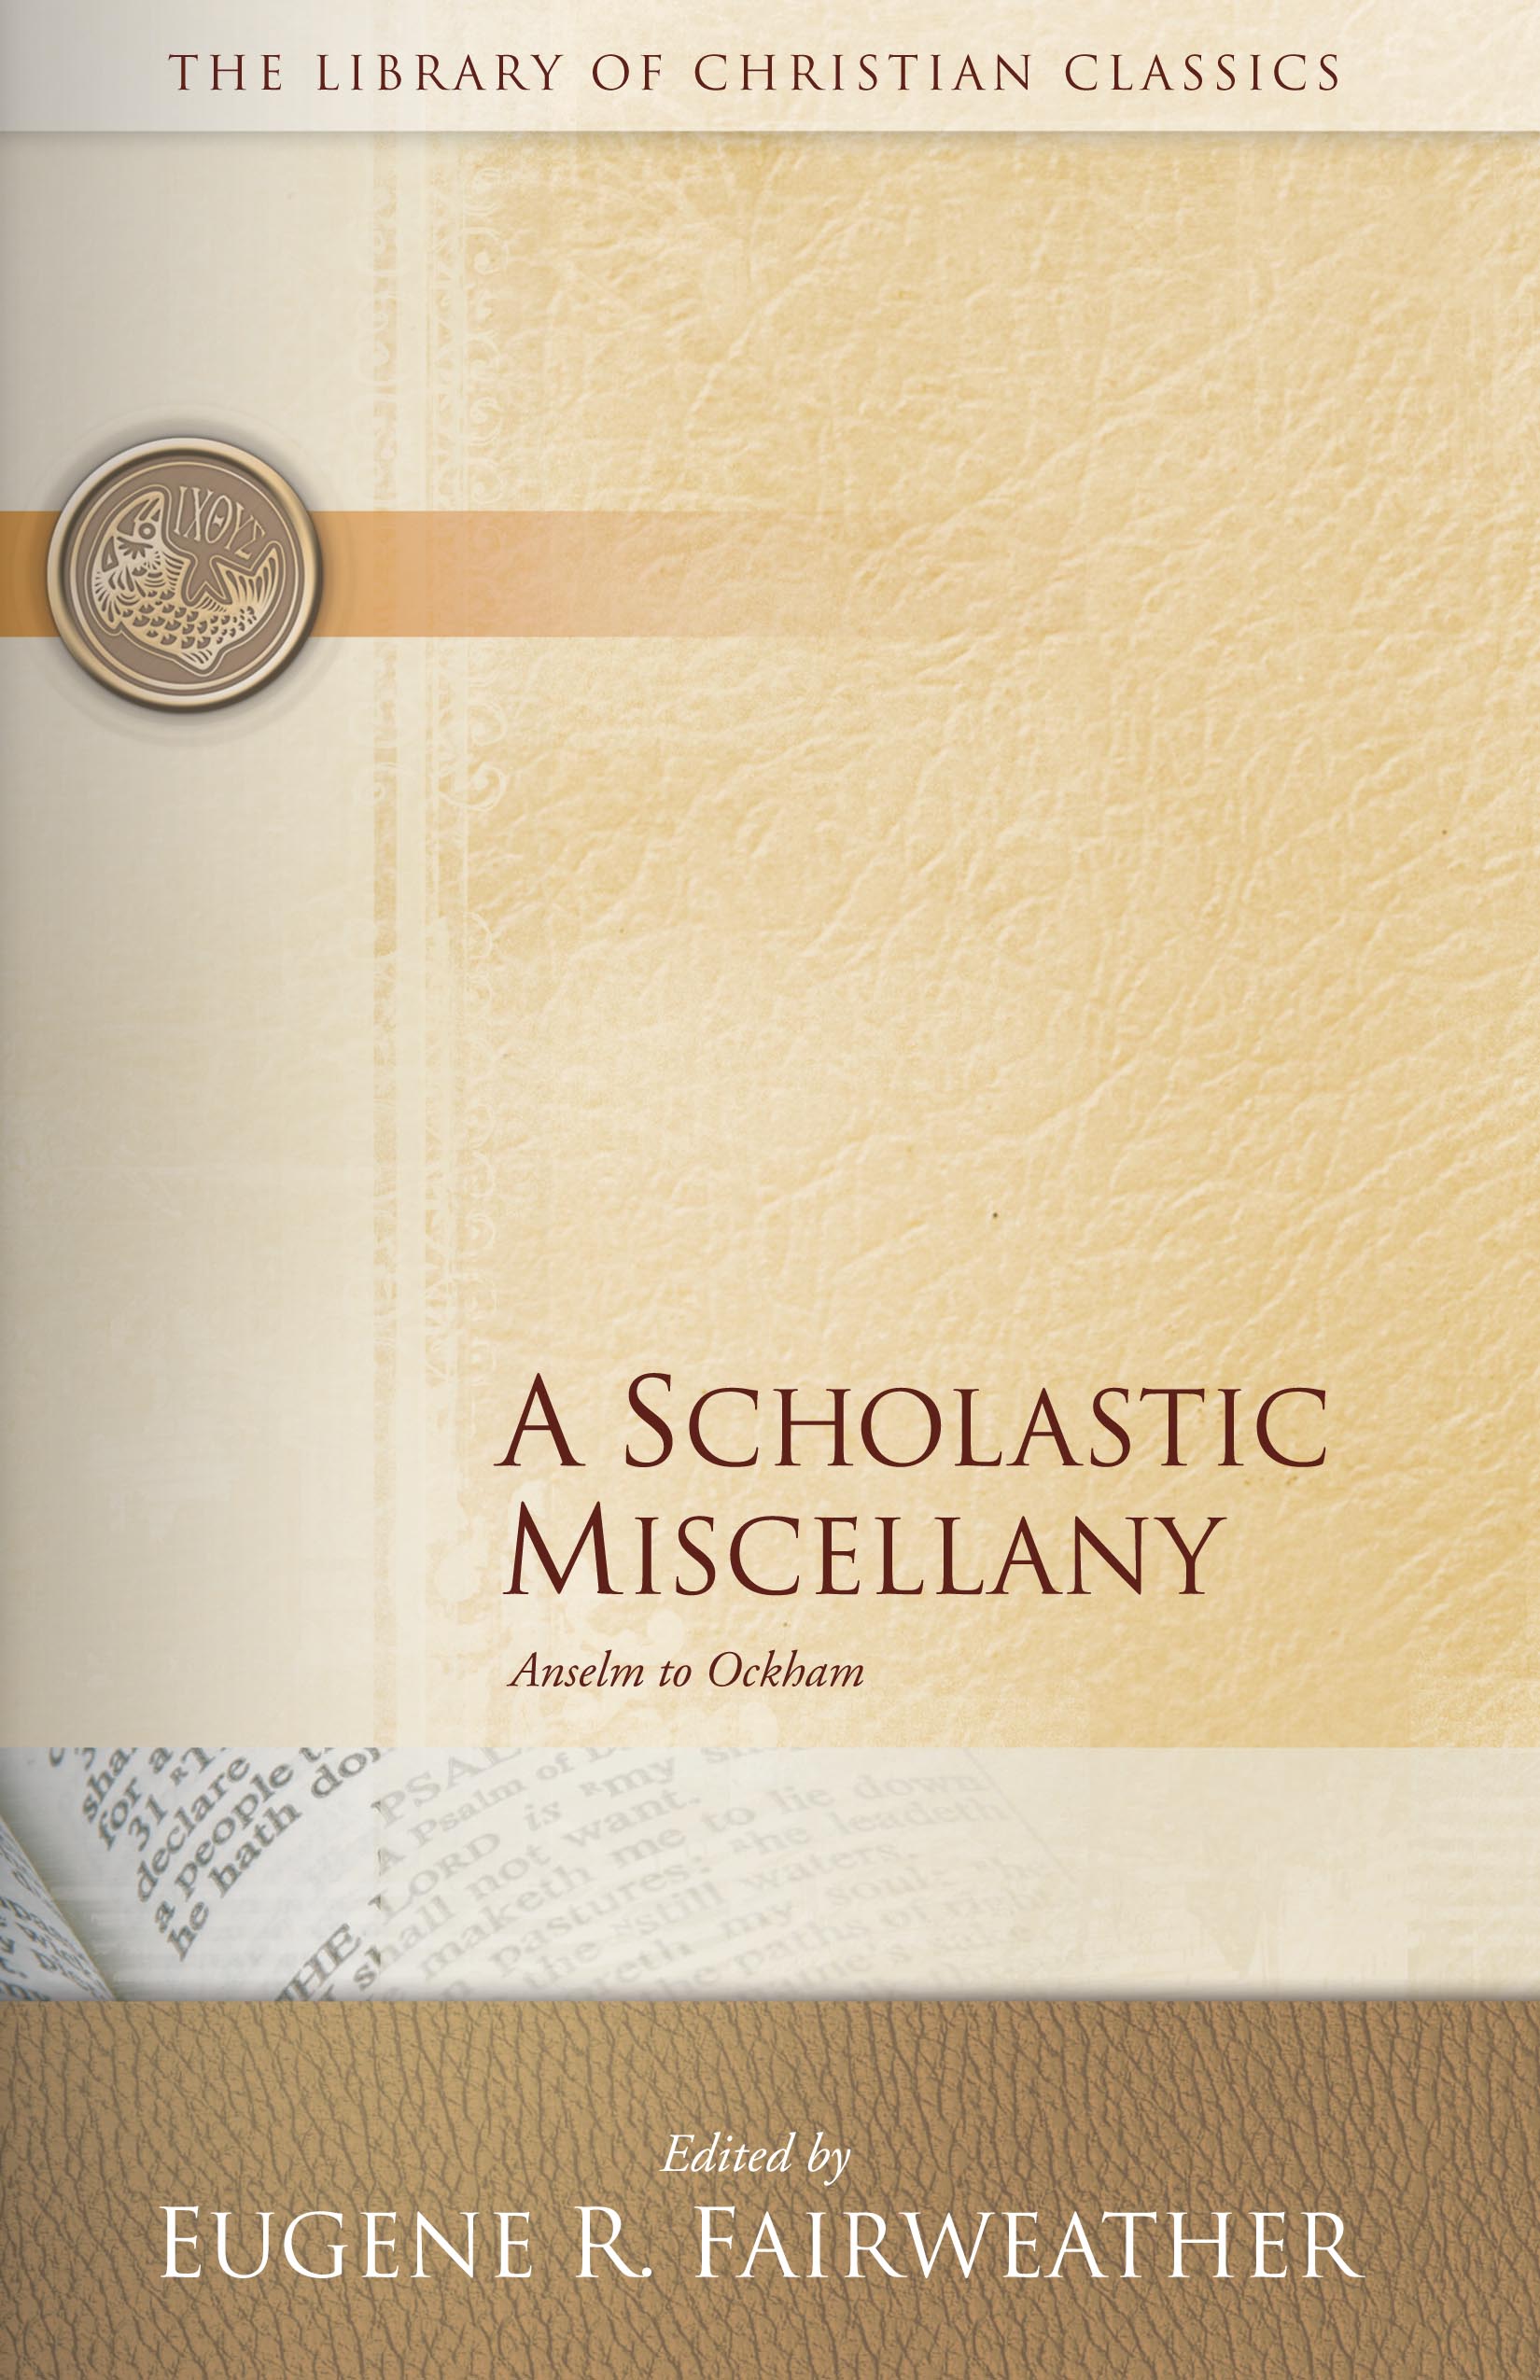 A Scholastic Miscellany